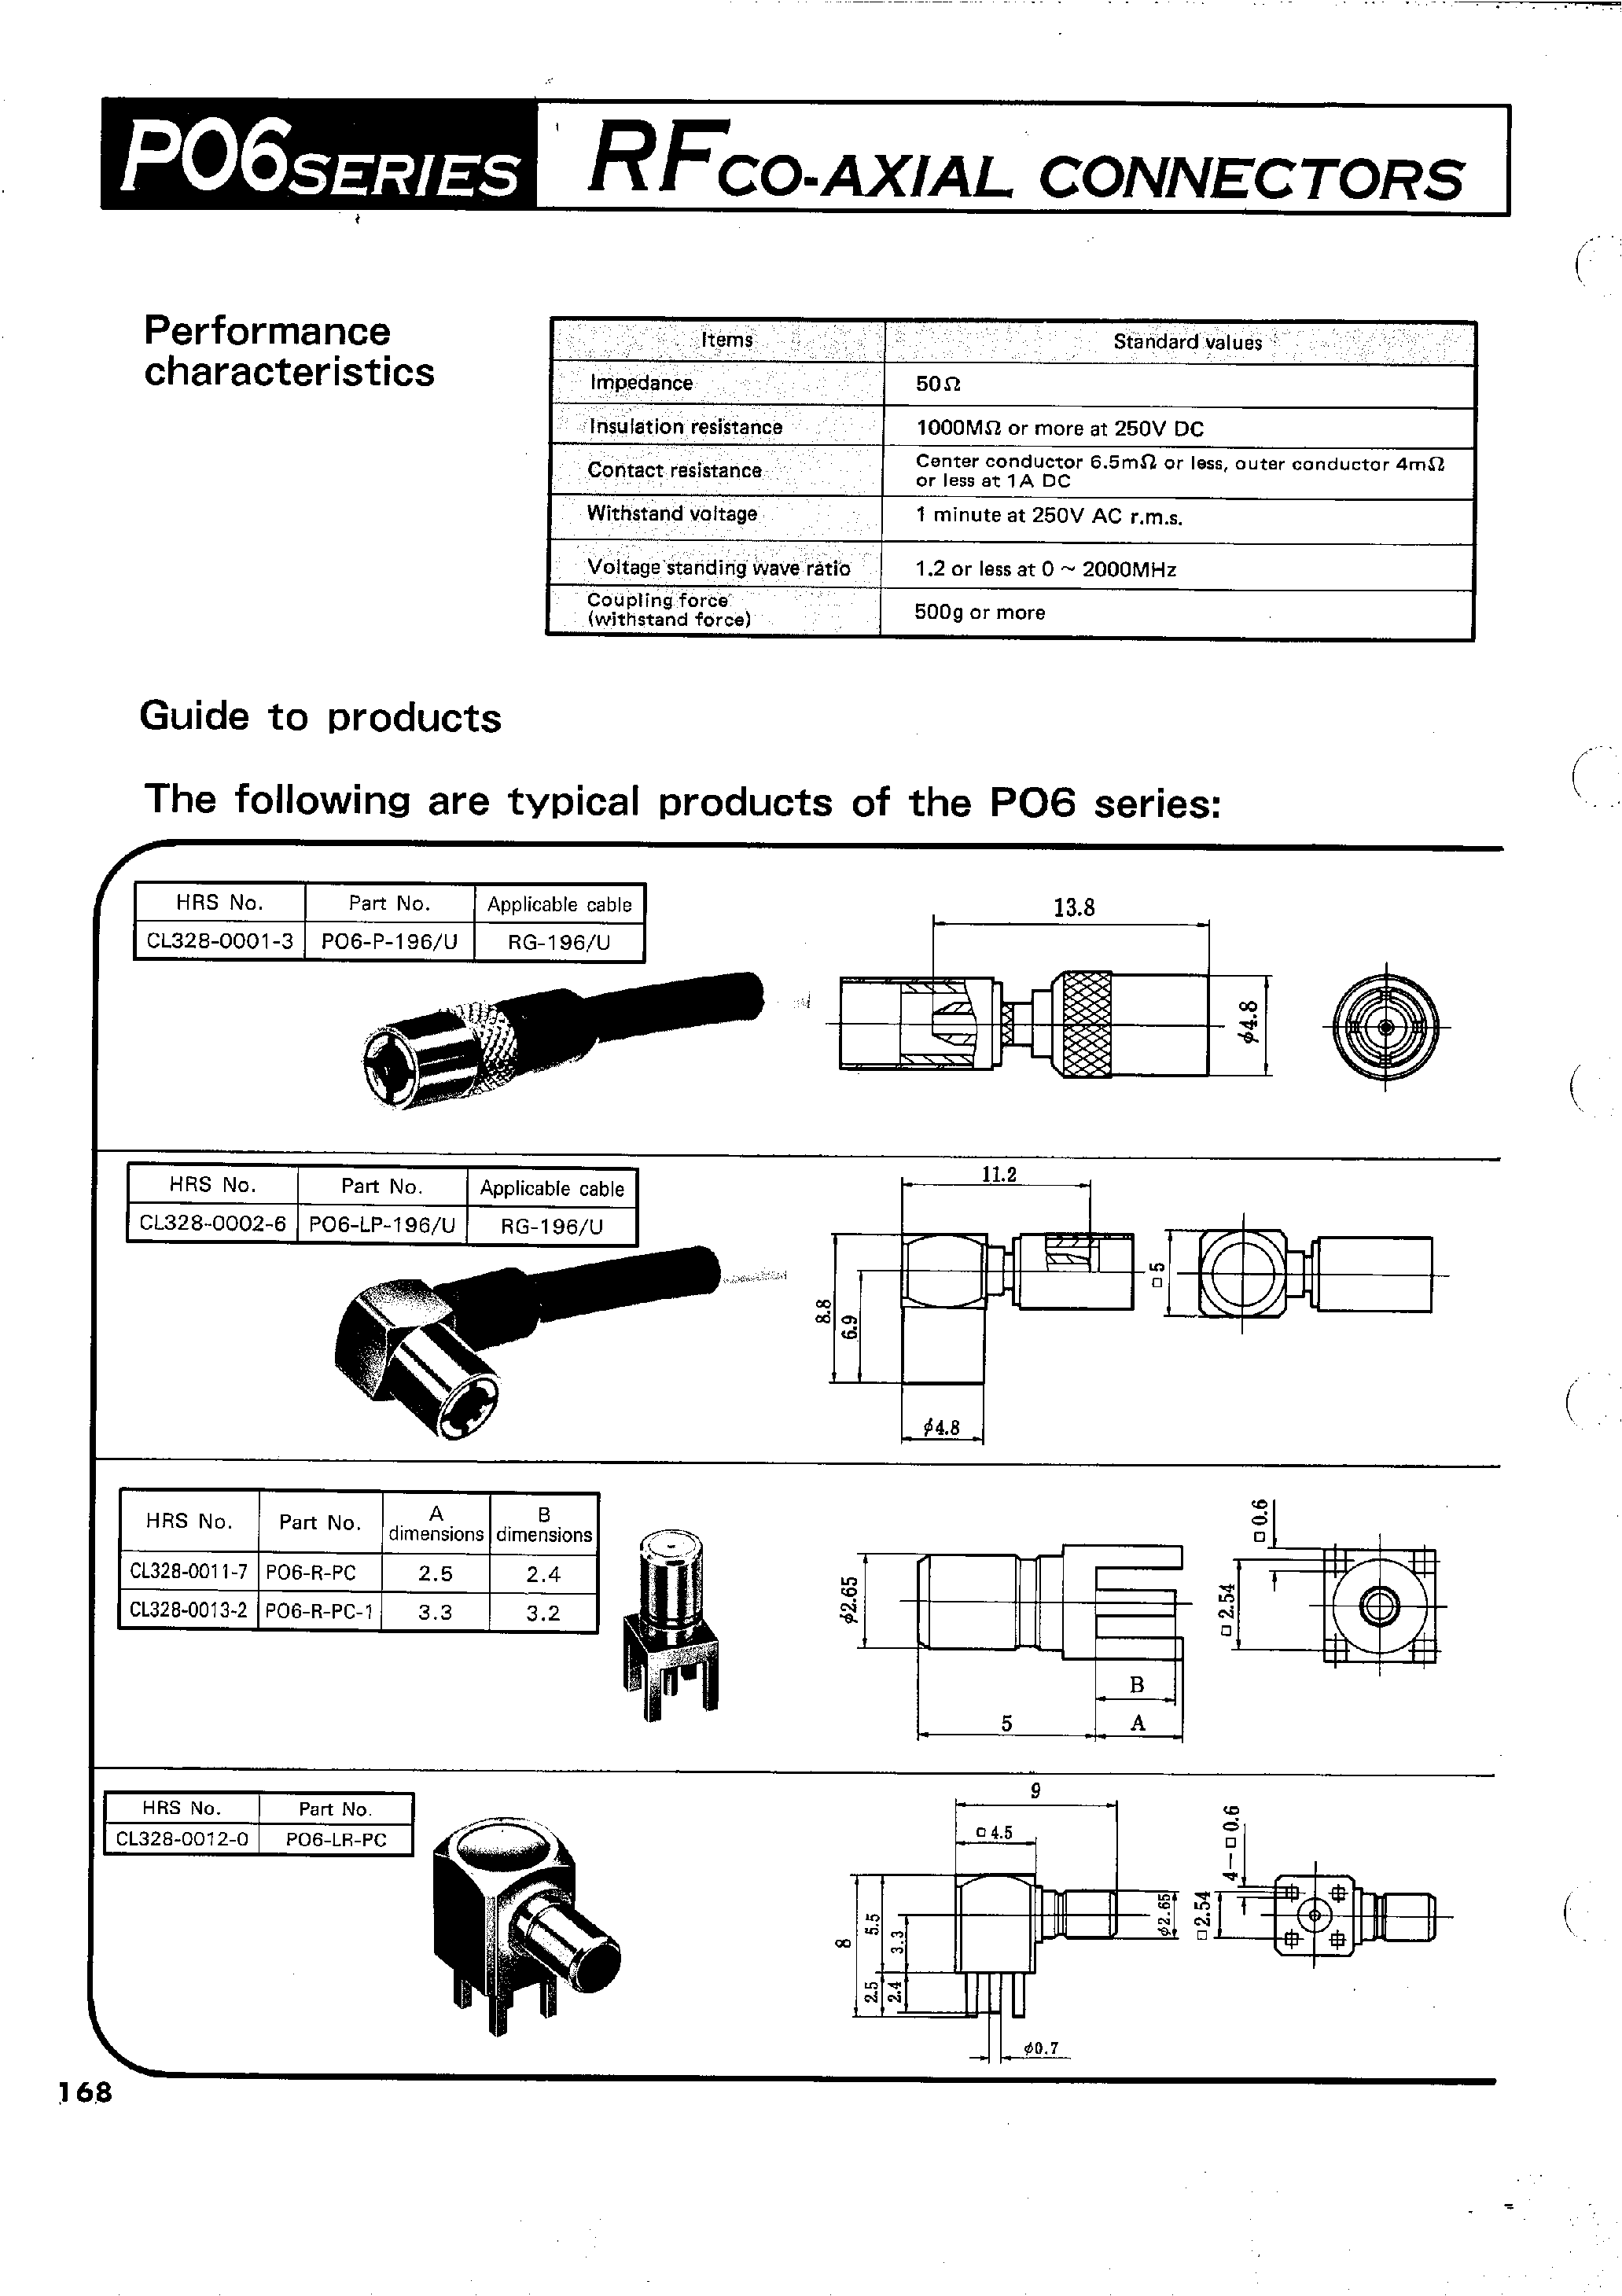 Datasheet PO6-LR-PC - RFCO-AXIAL CONNECTORS(Low-profile ultrasmall coaxial connector) page 2